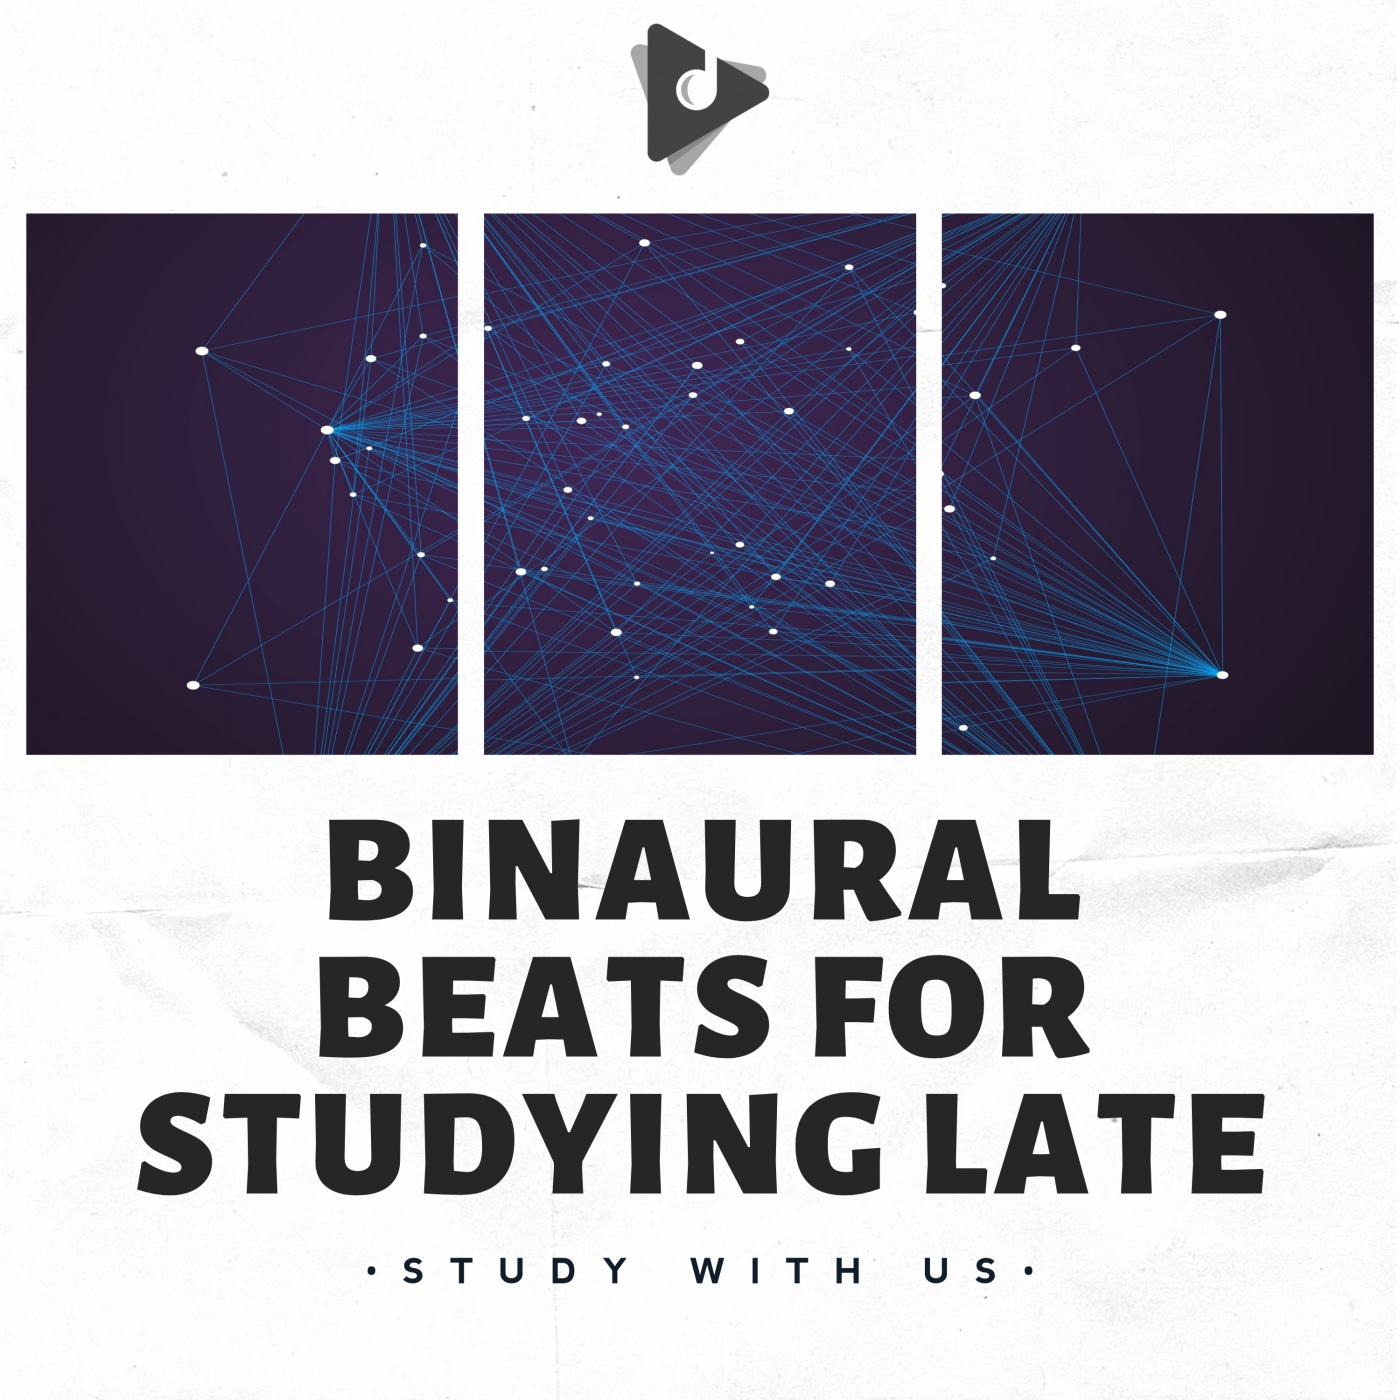 Binaural Beats for Studying Late